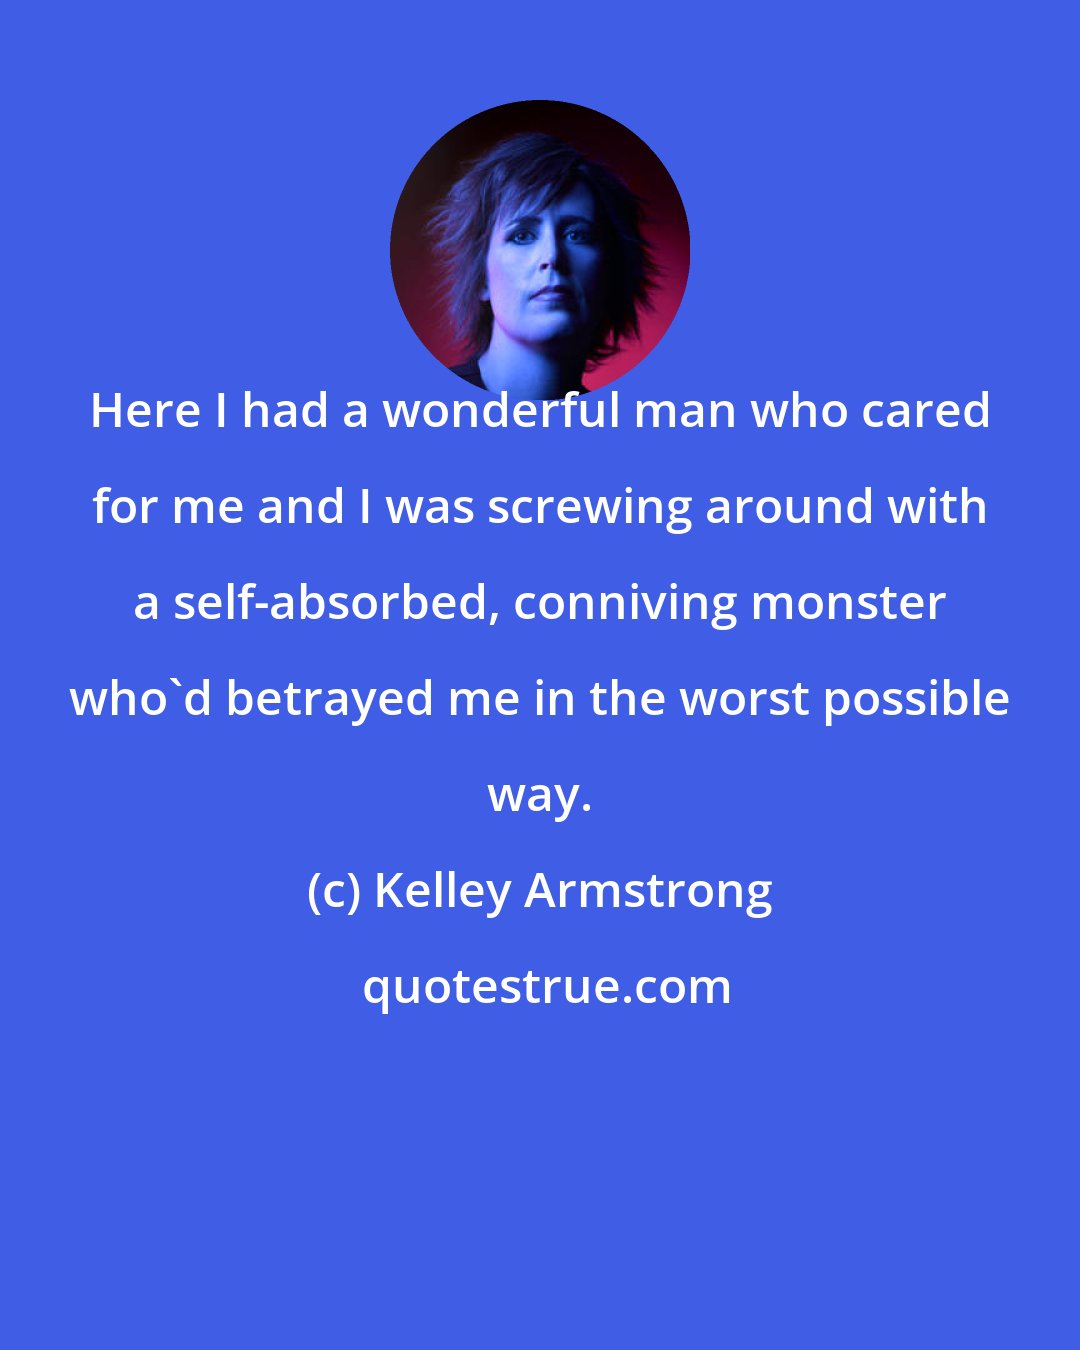 Kelley Armstrong: Here I had a wonderful man who cared for me and I was screwing around with a self-absorbed, conniving monster who'd betrayed me in the worst possible way.